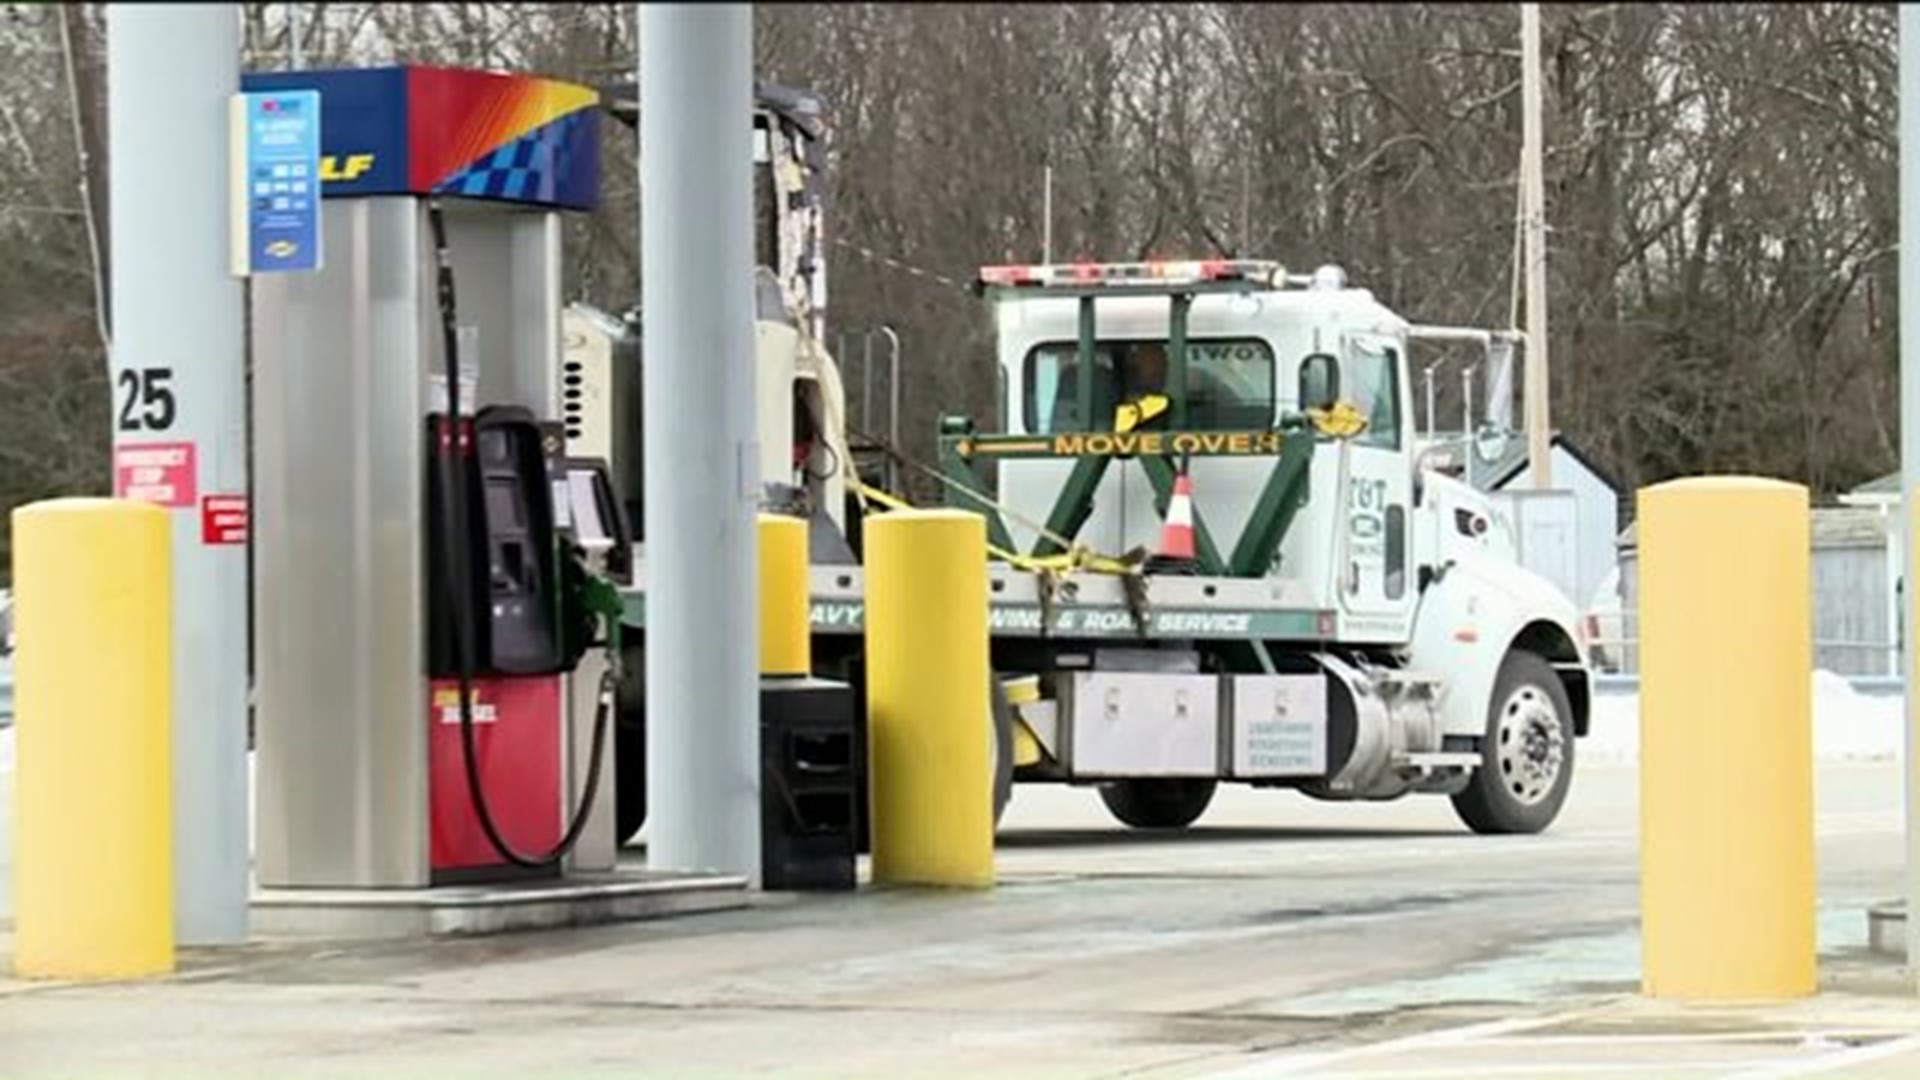 Drivers Have Mixed Reactions to Increase in Pennsylvania Turnpike Tolls